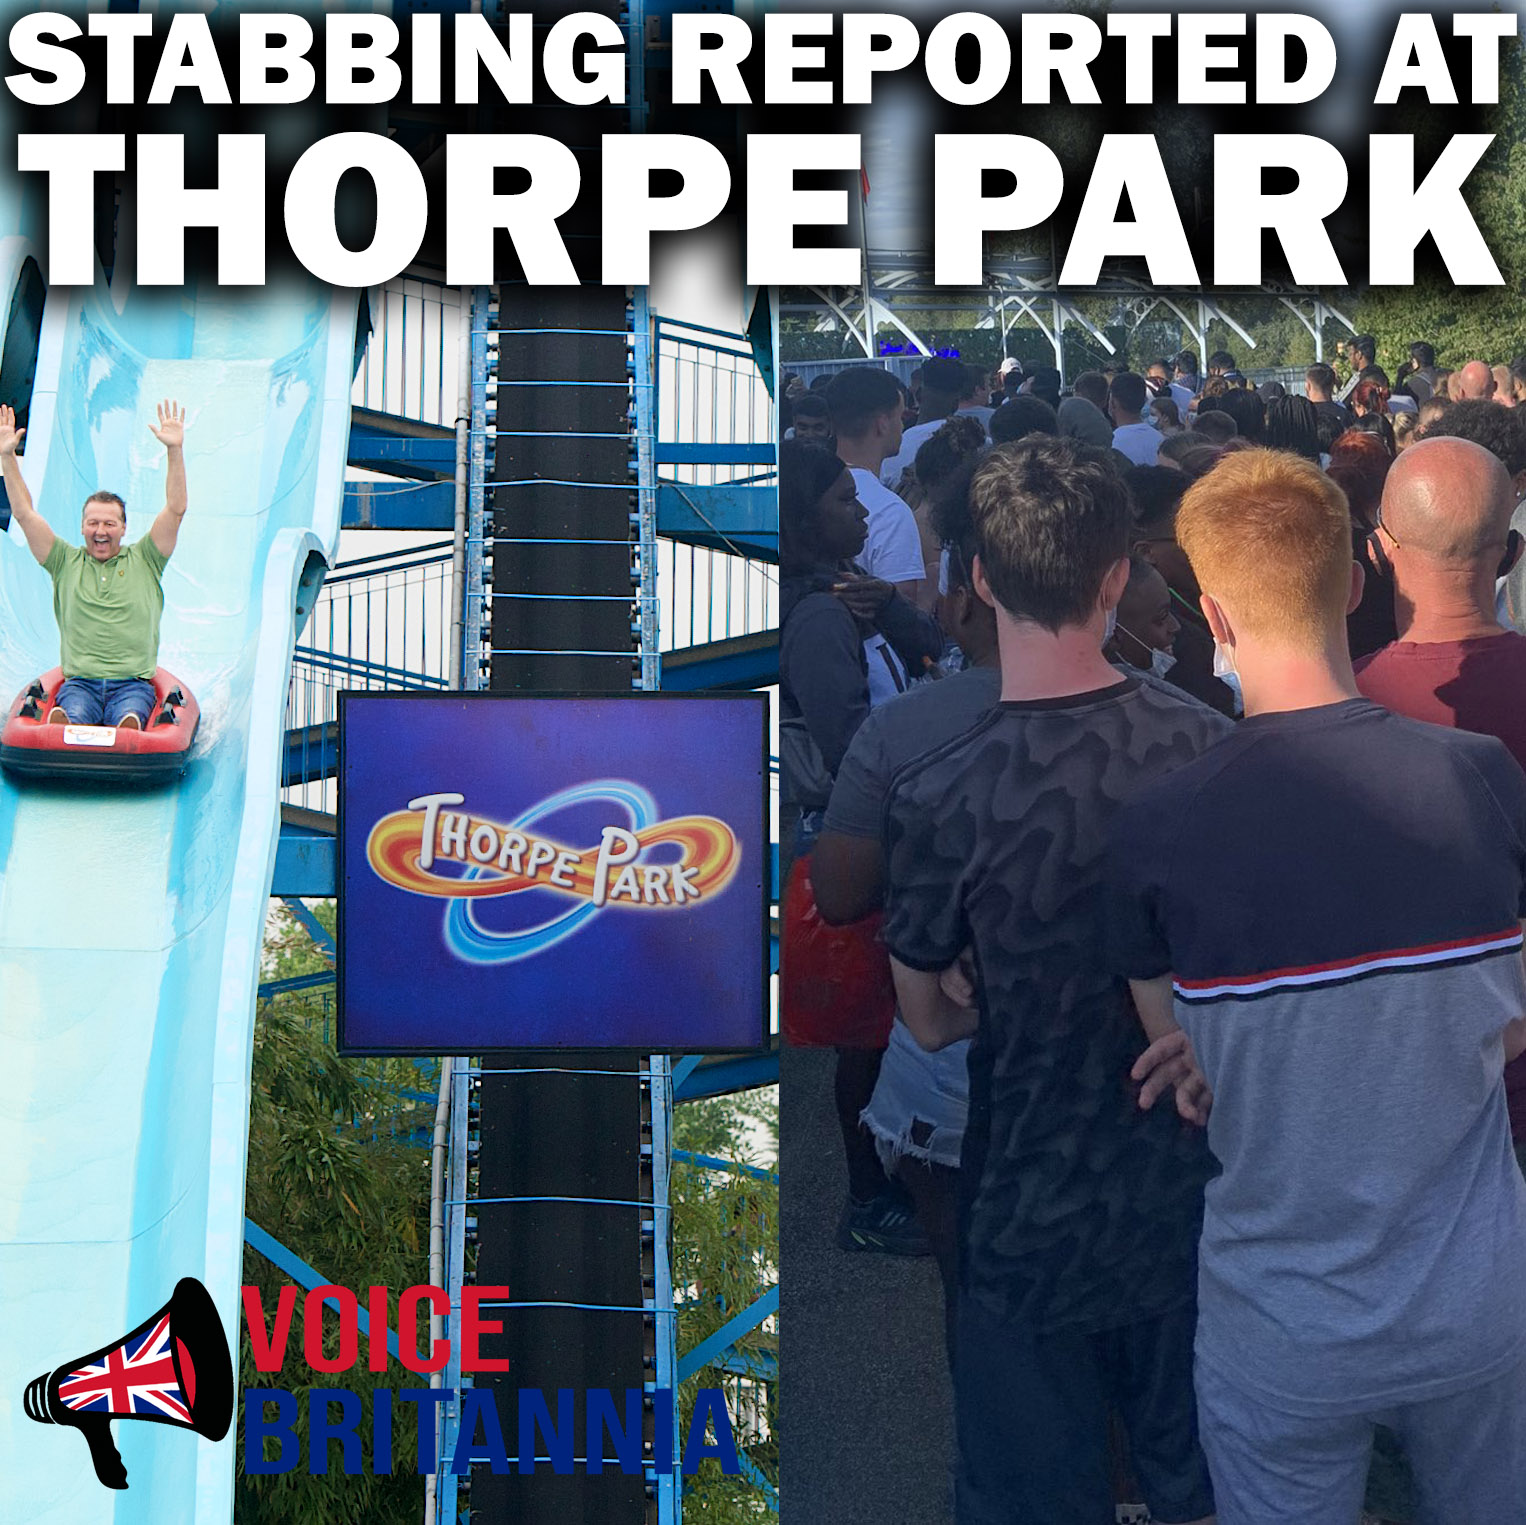 stabbing reported at thorpe park